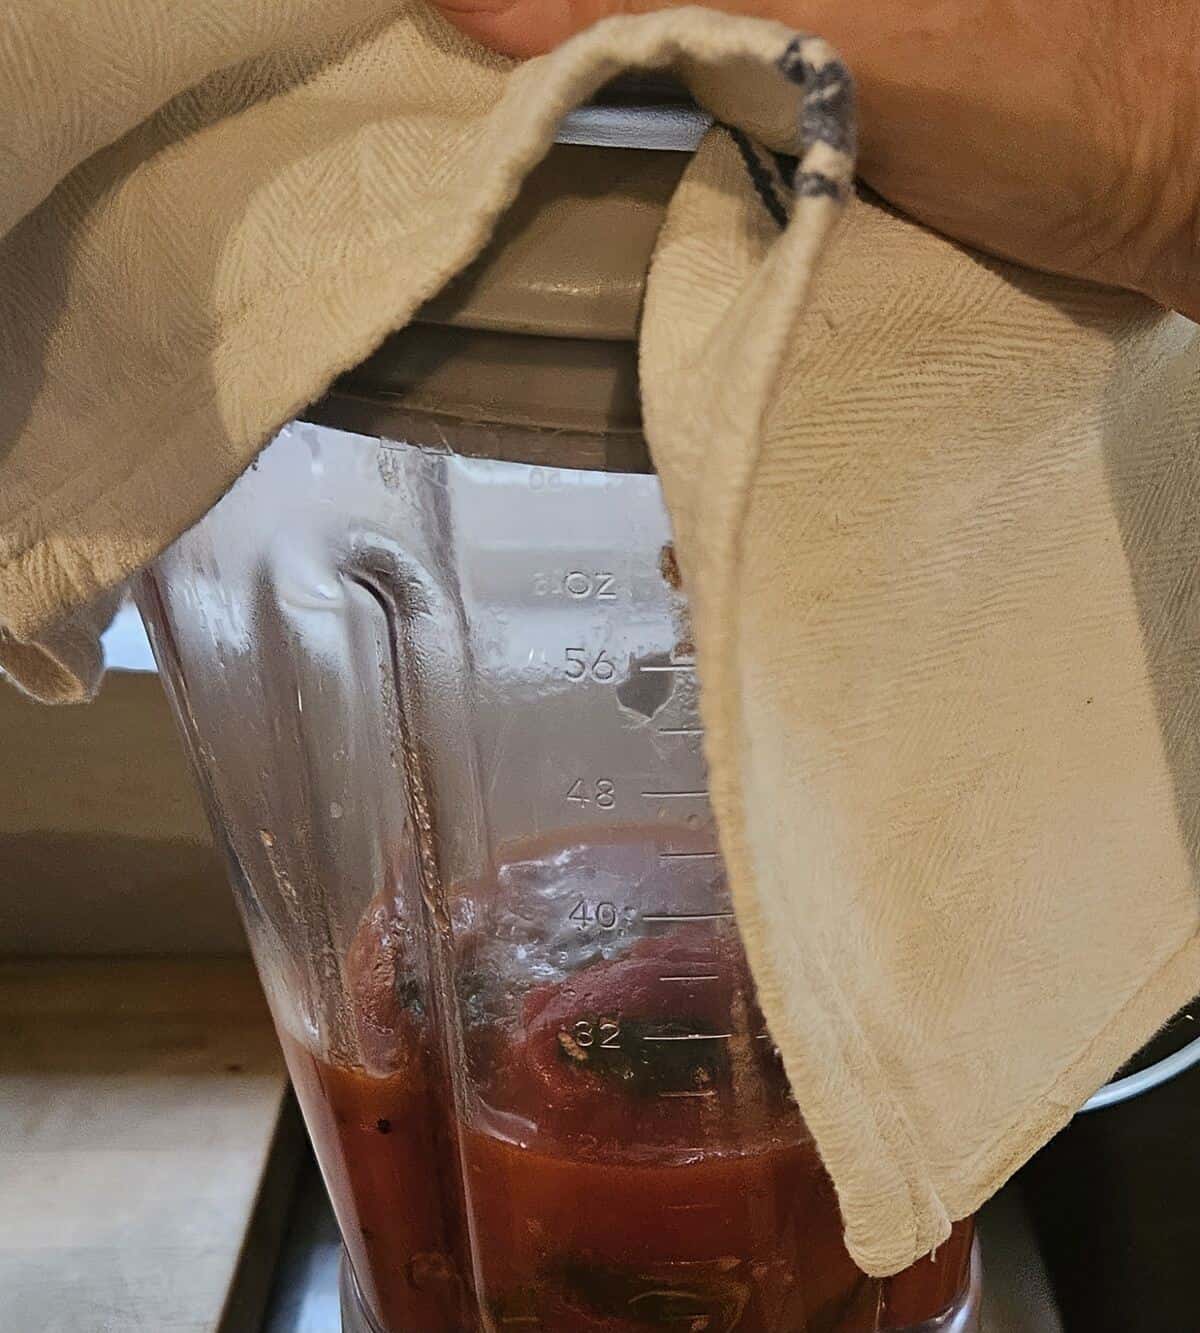 blender loaded with unprocessed tomato soup, a hand covering the lid with a dry towel.